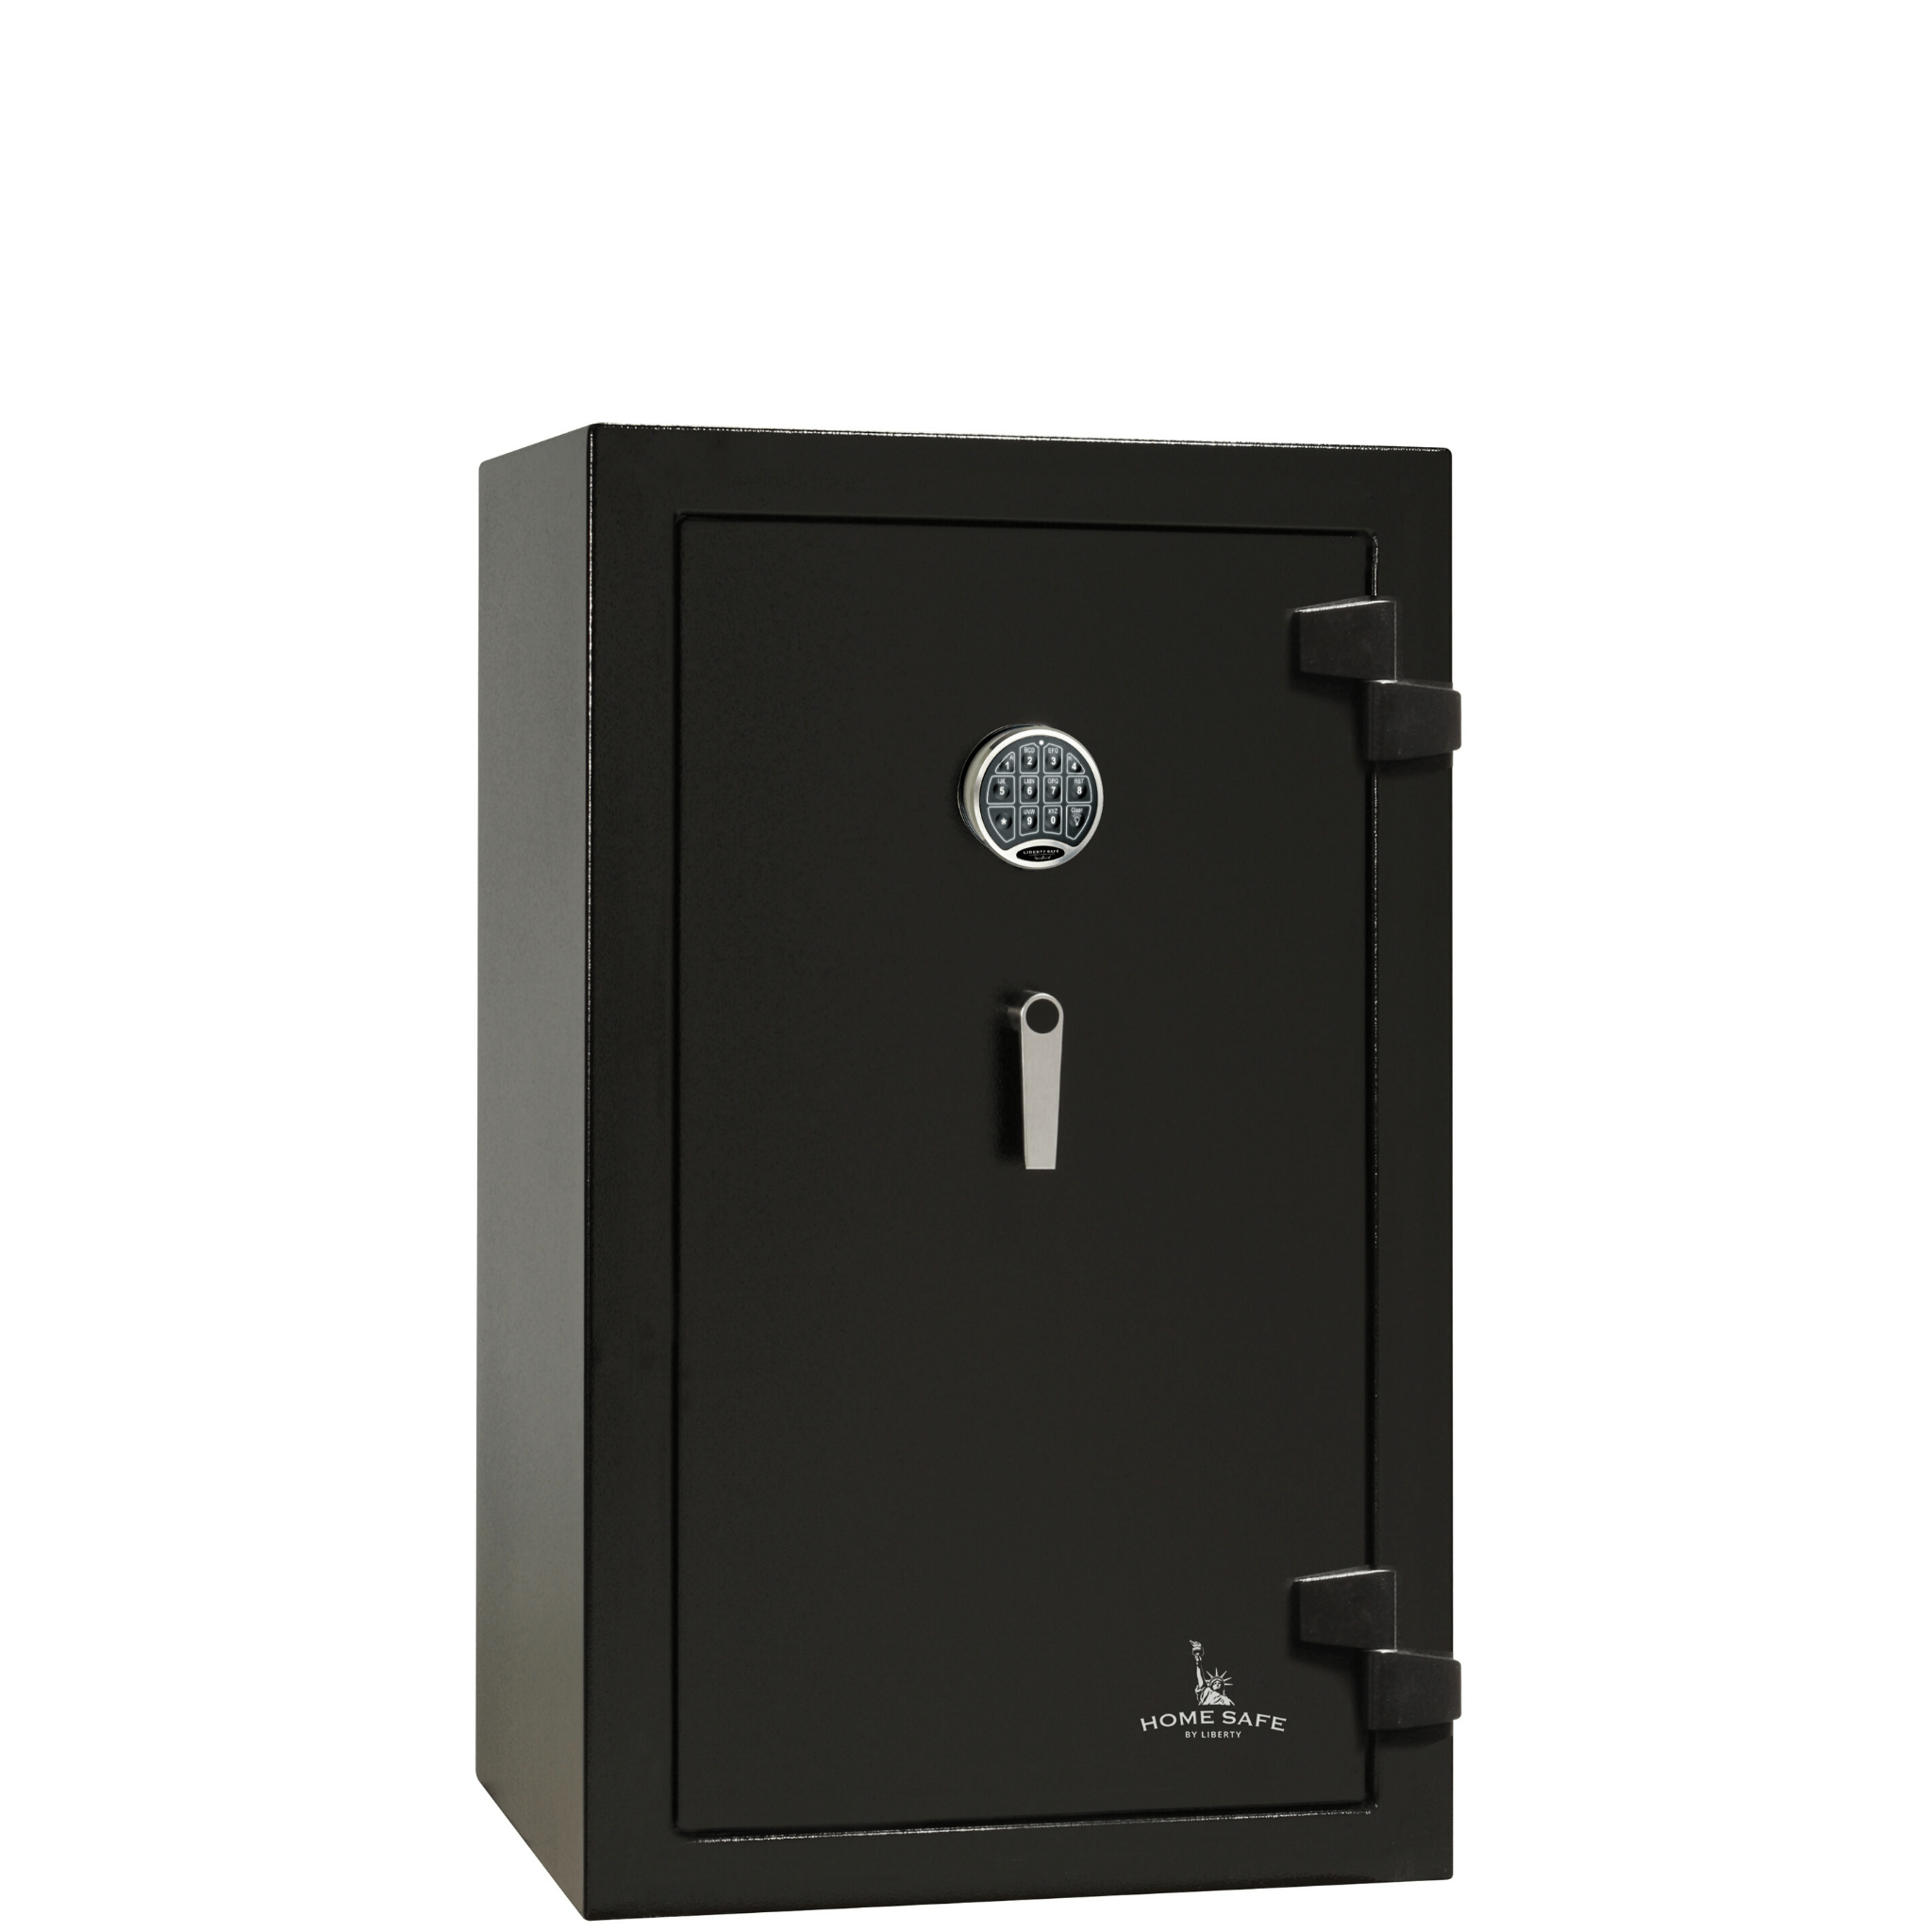 Home Safe | 12 | 60 Minute Fire Protection | Black | Electronic Lock | Dimensions: 42"(H) x 24.25"(W) x 22"(D)